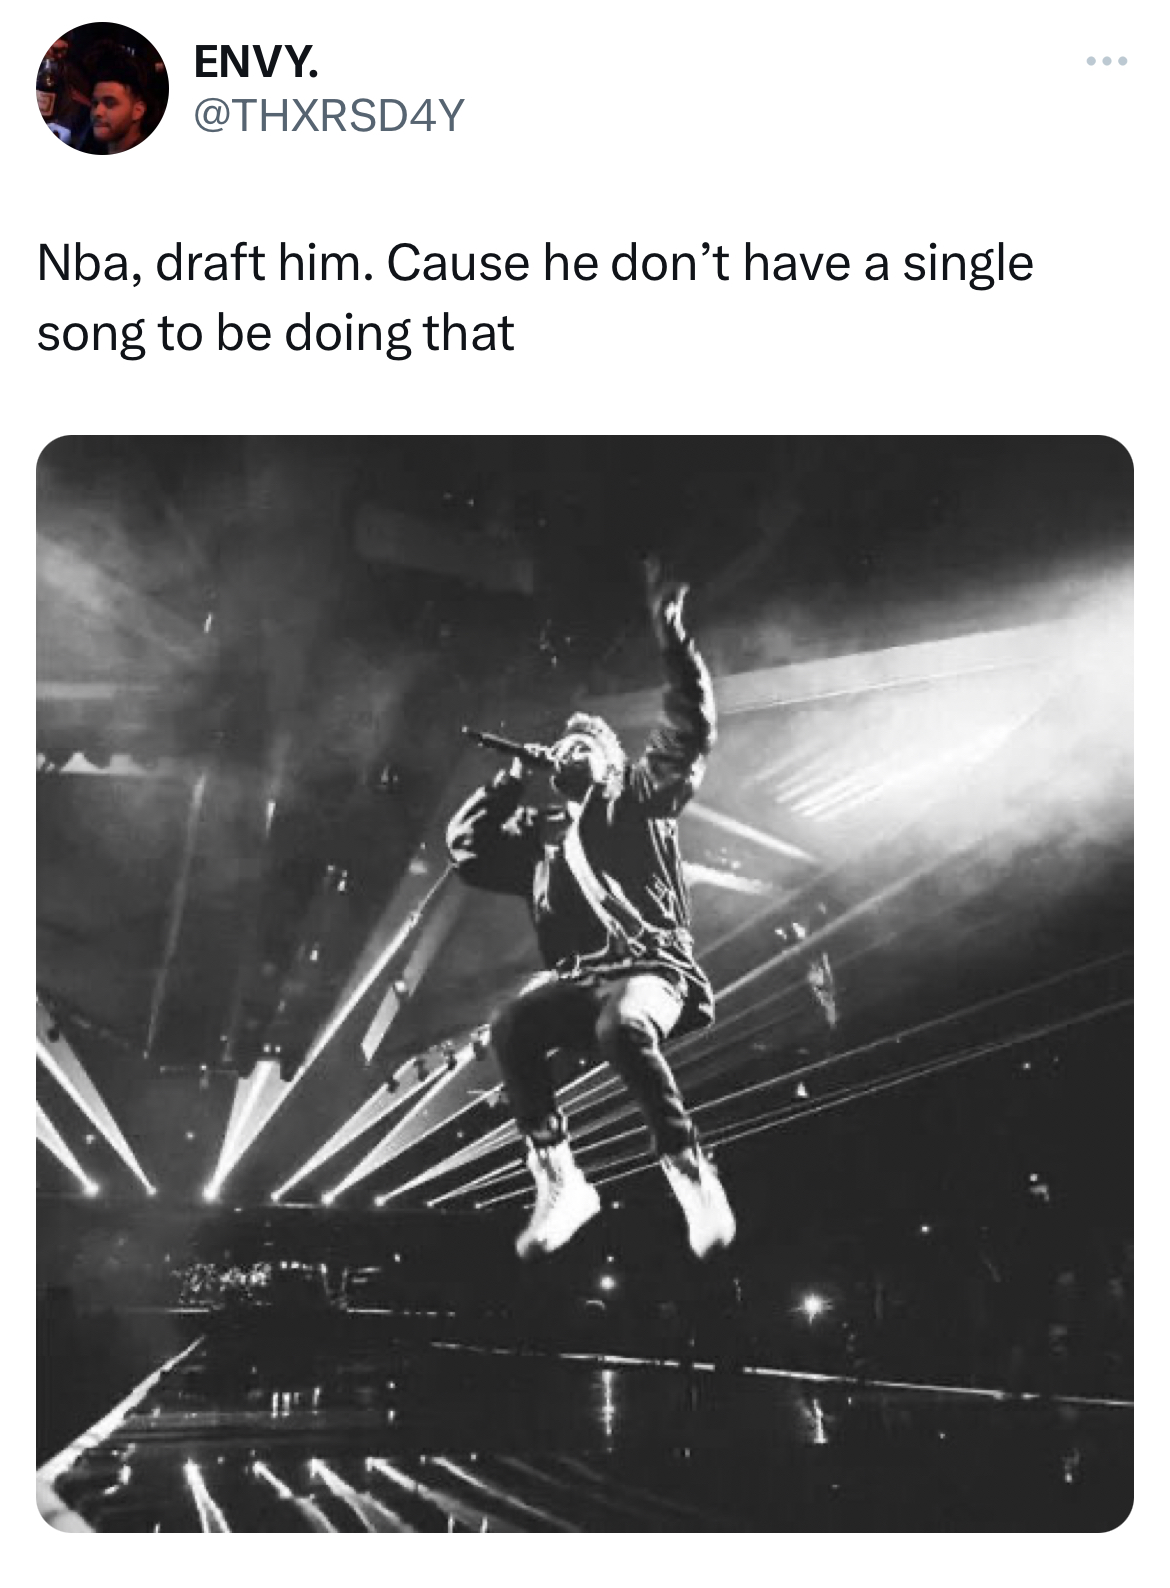 Don't have a single song where they need to do this - poster - Envy. Nba, draft him. Cause he don't have a single song to be doing that